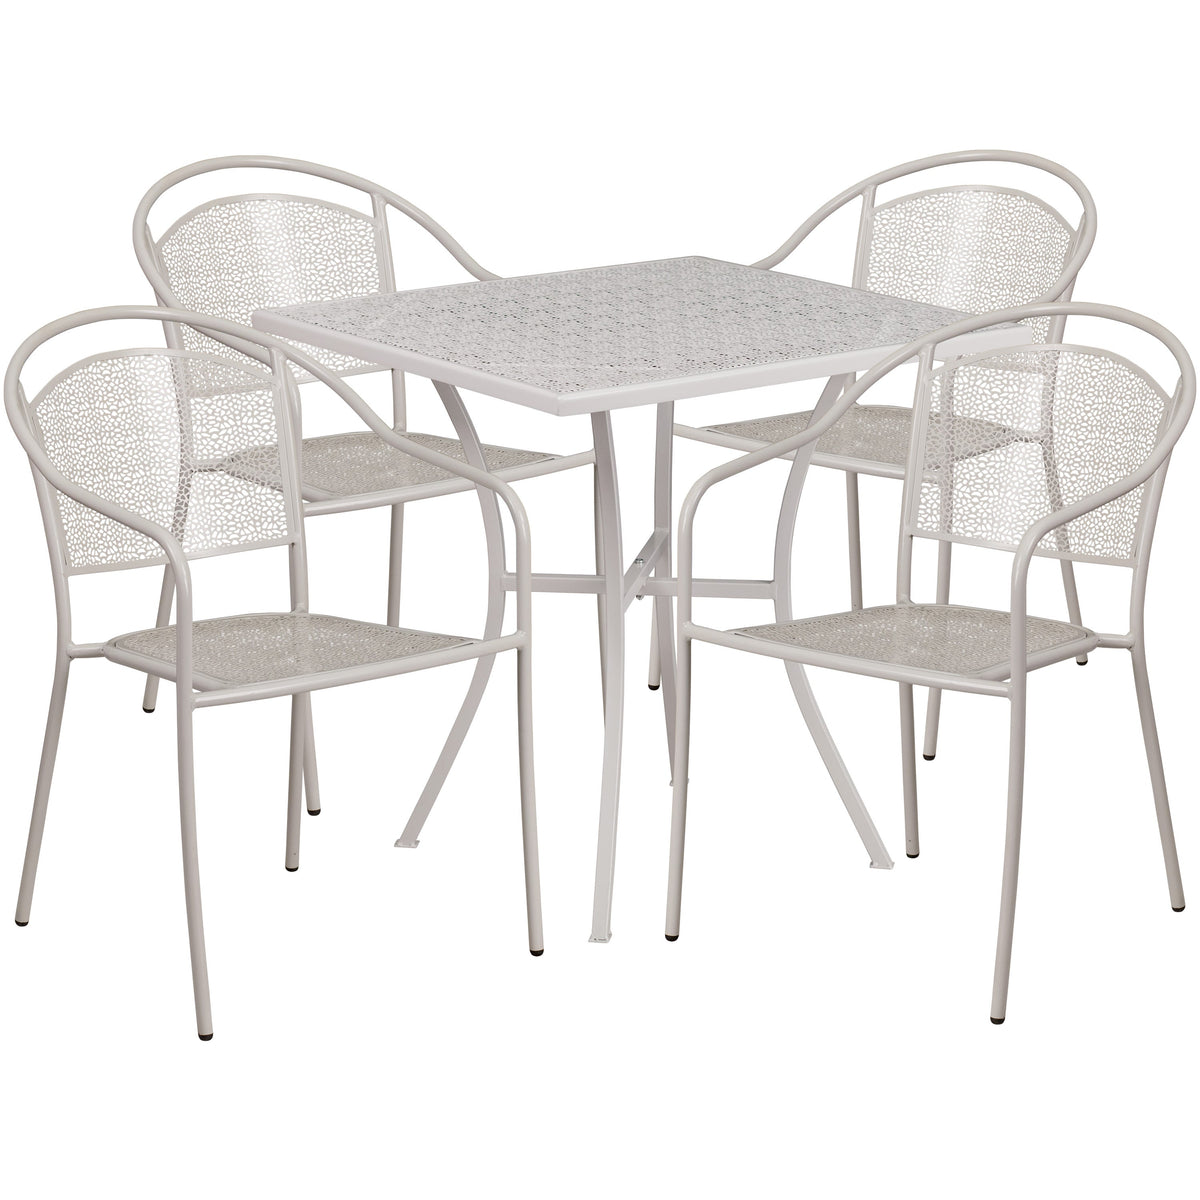 Light Gray |#| 28inch Square Lt Gray Indoor-Outdoor Steel Patio Table Set - 4 Round Back Chairs